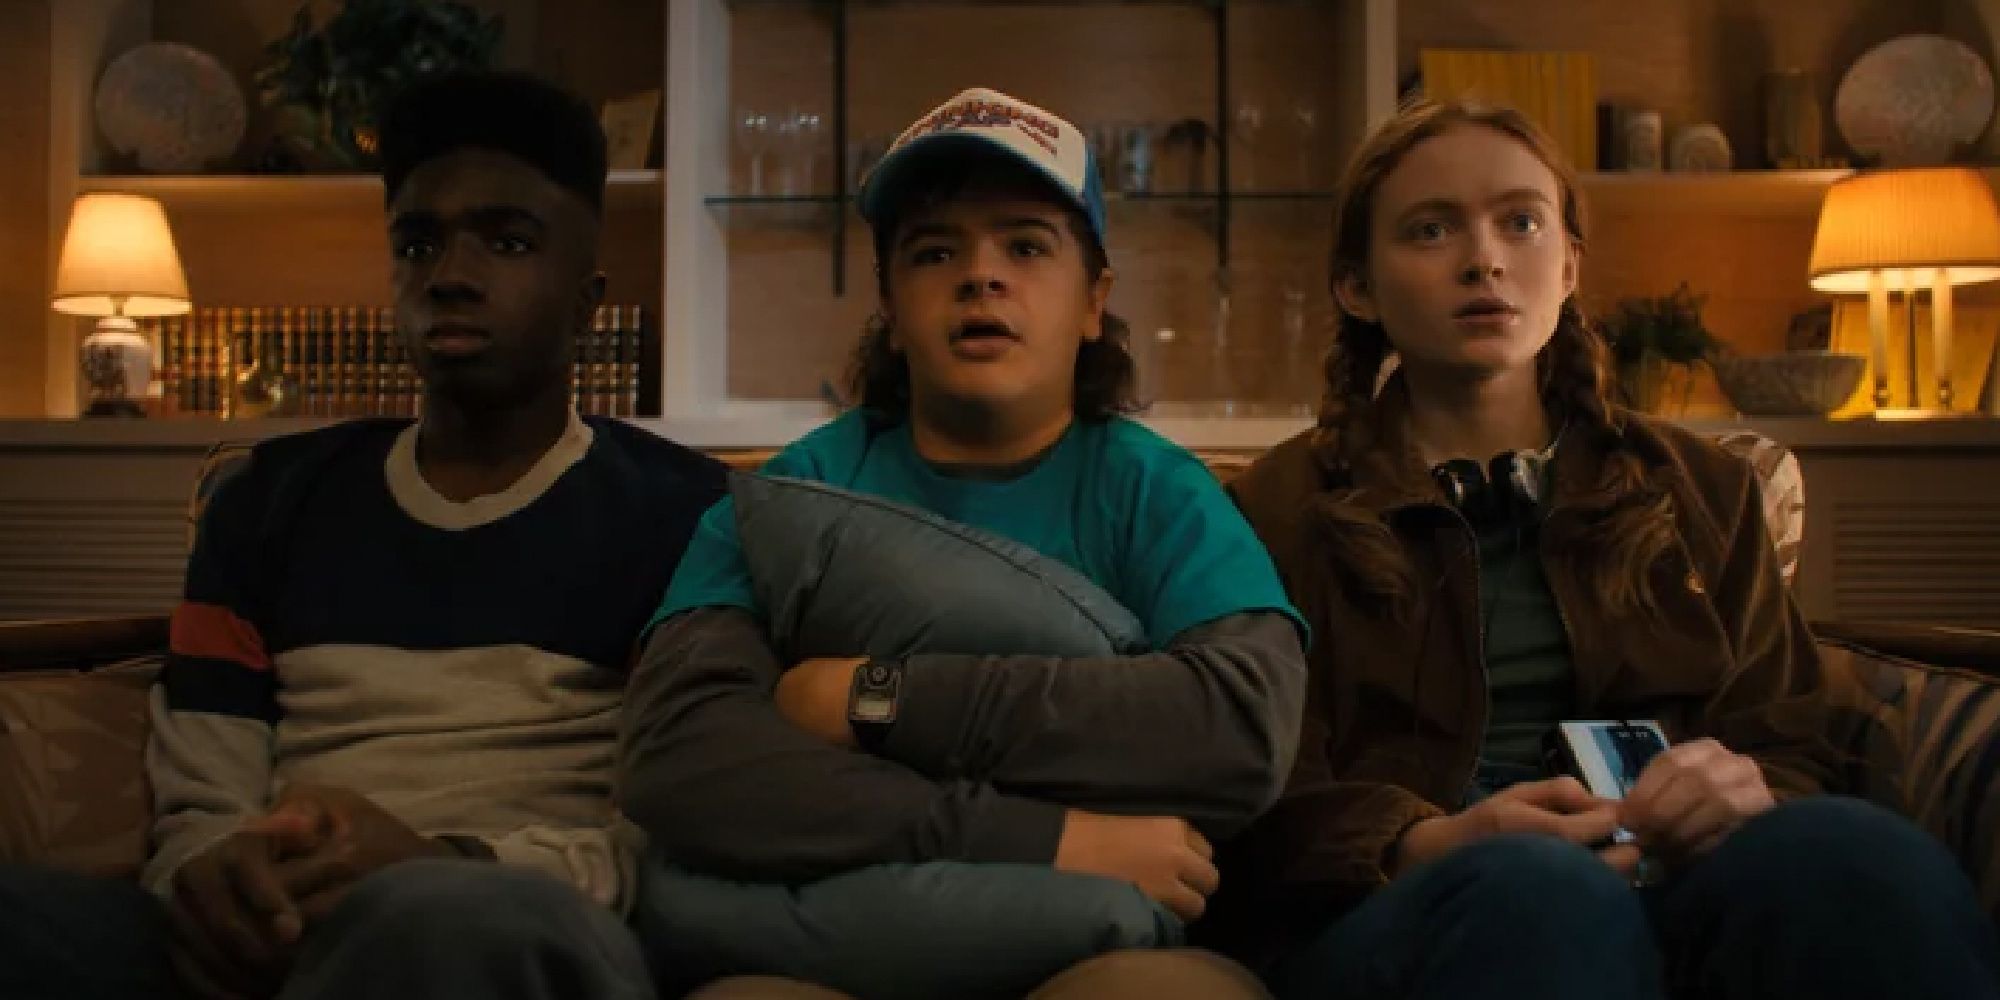 Lucas, Dustin, and Max on the couch on Stranger Things